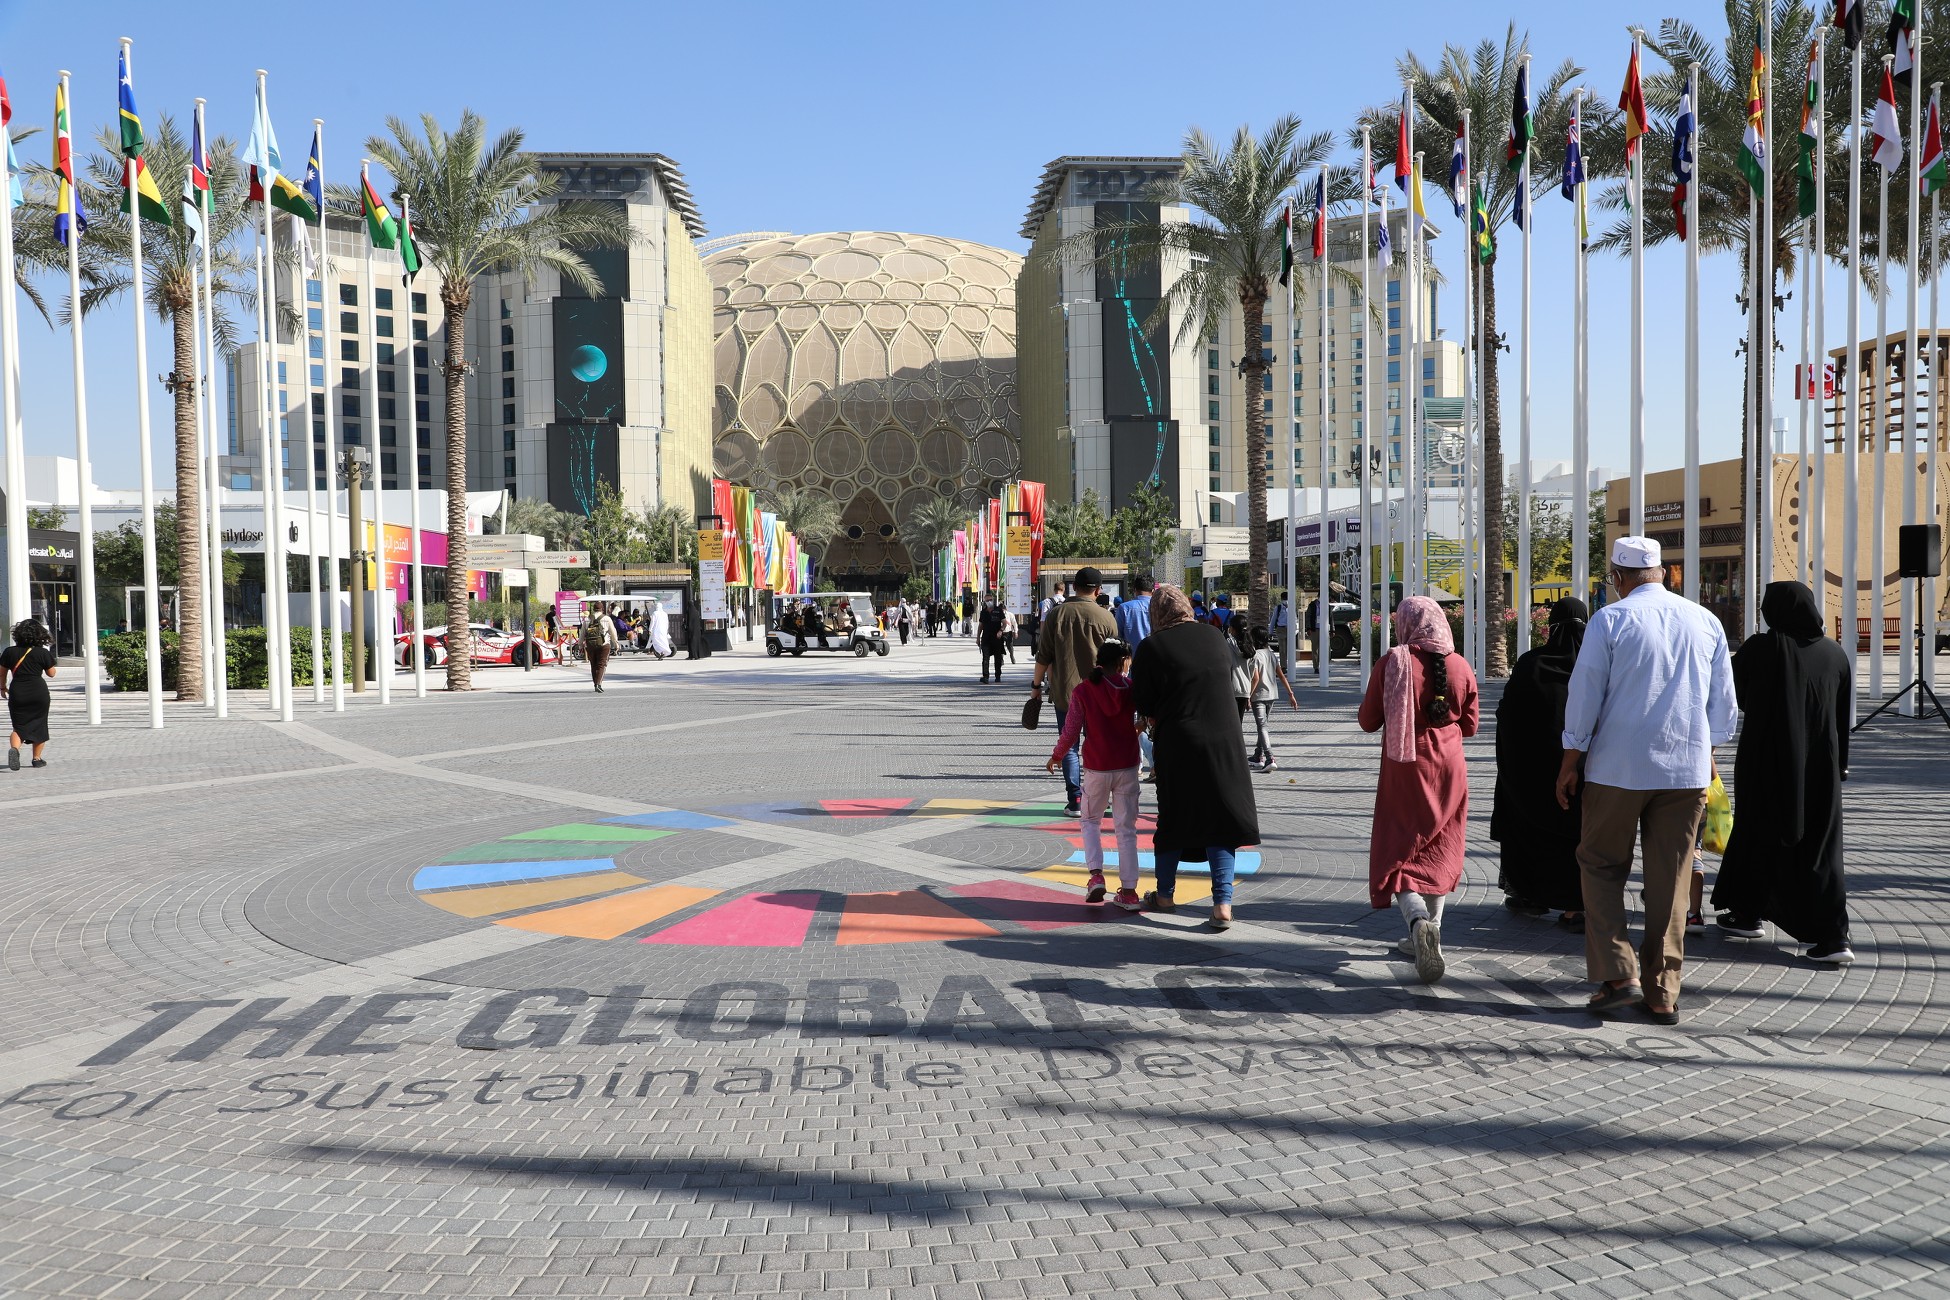 The 2022 Global Goals Week at the UN Hub at Expo 2020 Dubai: We All Can Drive Global Change for a Sustainable Future